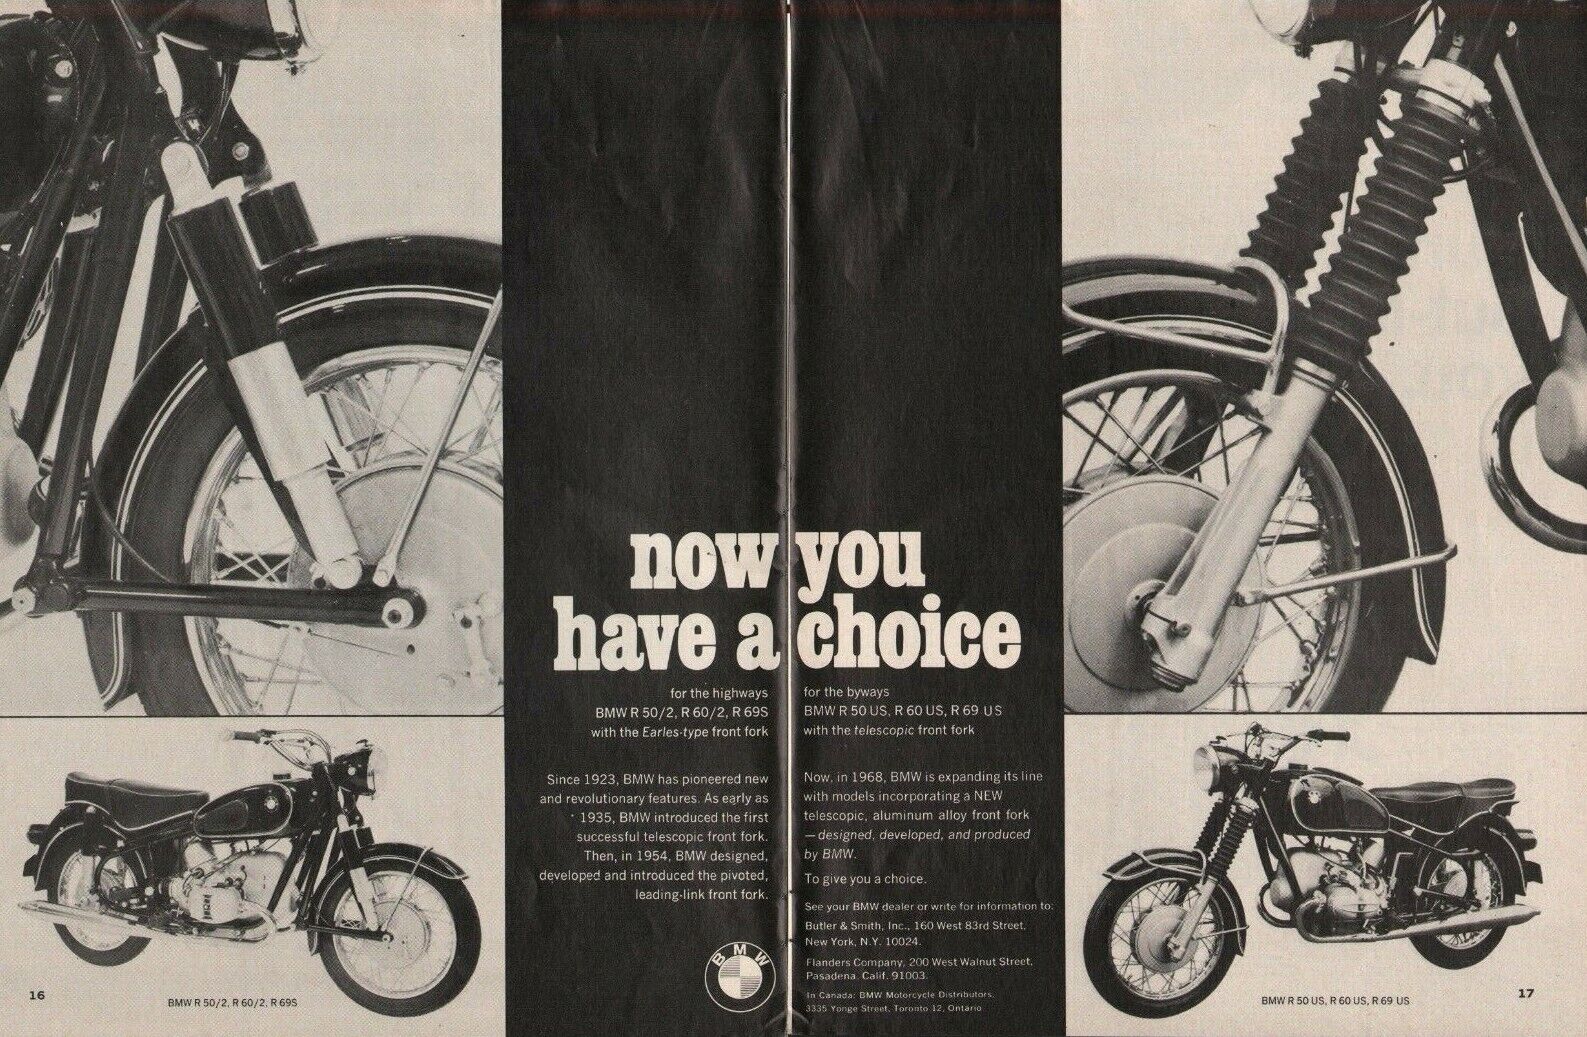 1968 BMW for the Highways & Byways - 2-Page Vintage Motorcycle Ad